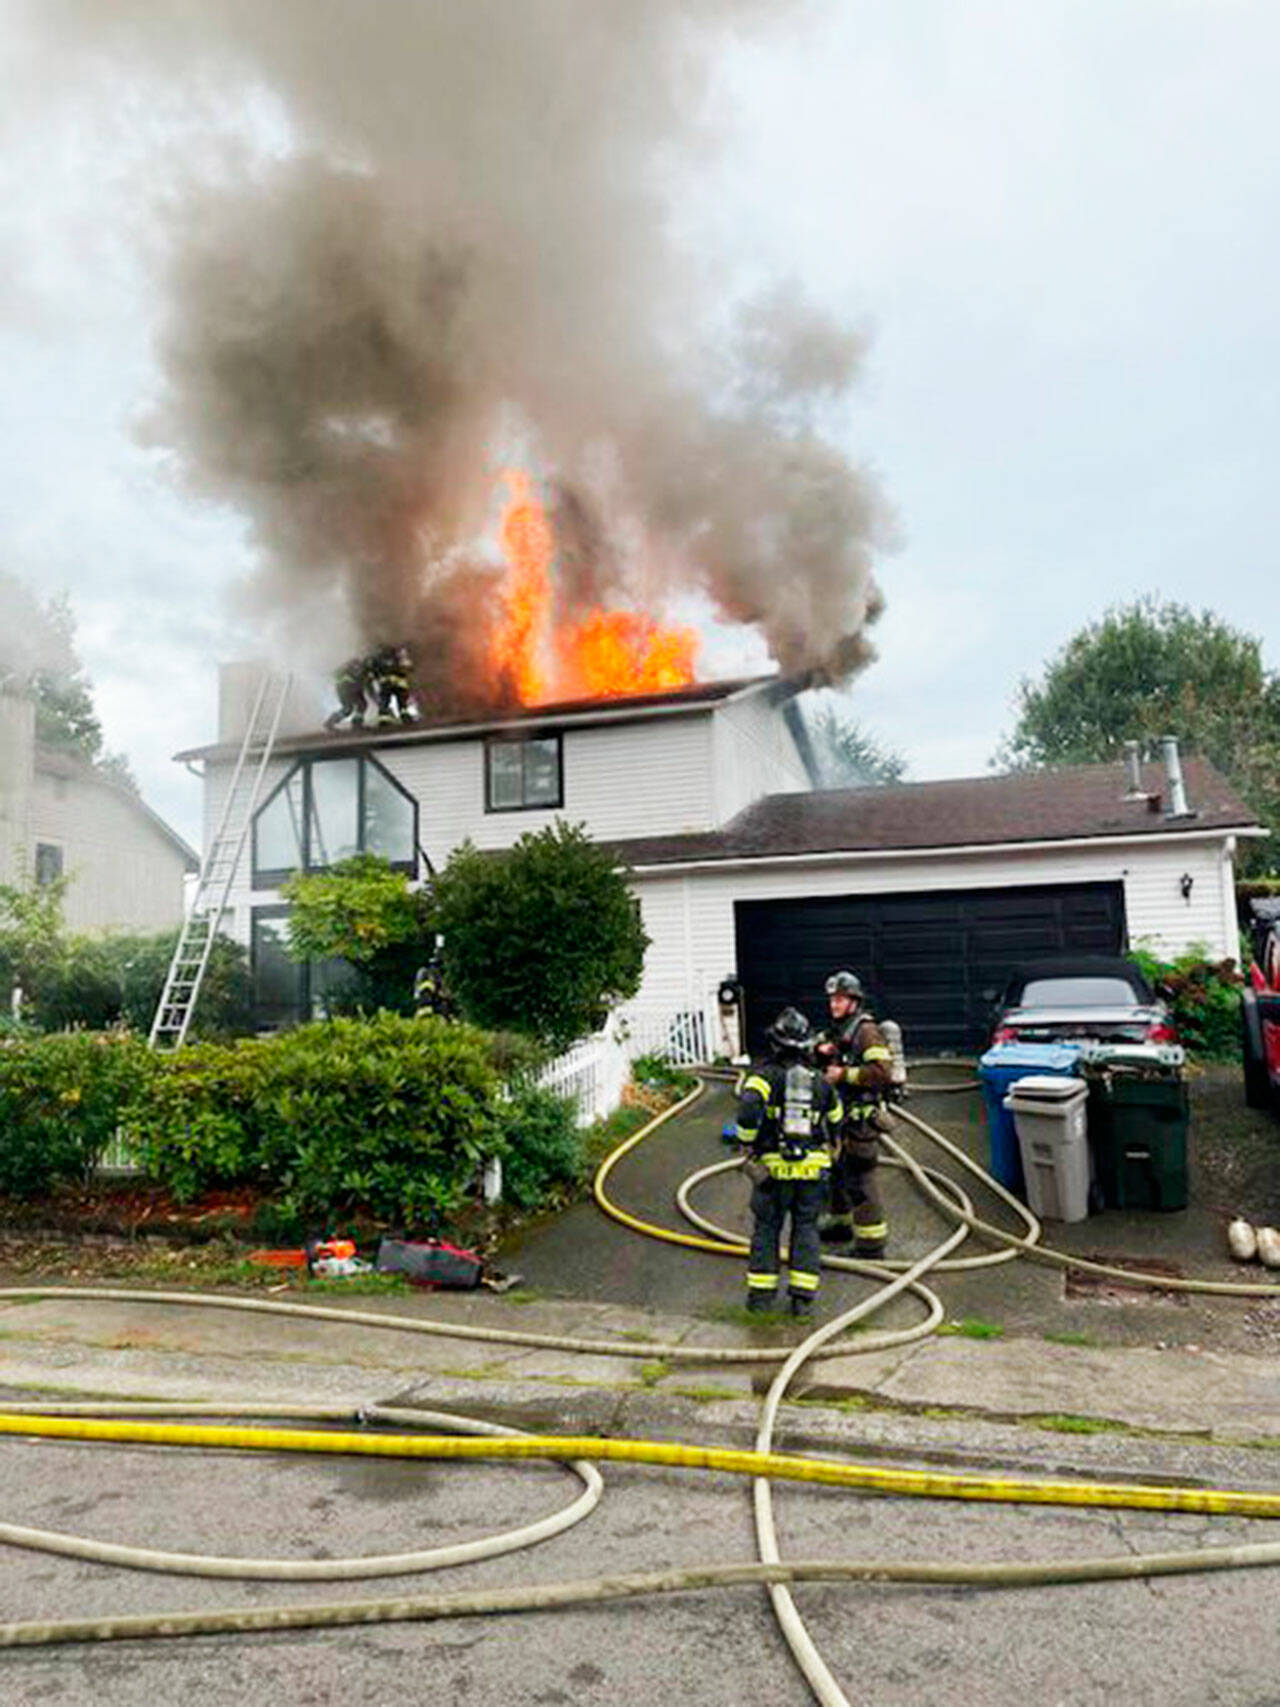 Firefighters battle a blaze at a Kent house Tuesday, Sept. 26 in the 13000 block of SE 215th Street. COURTESY PHOTO, Puget Sound Fire